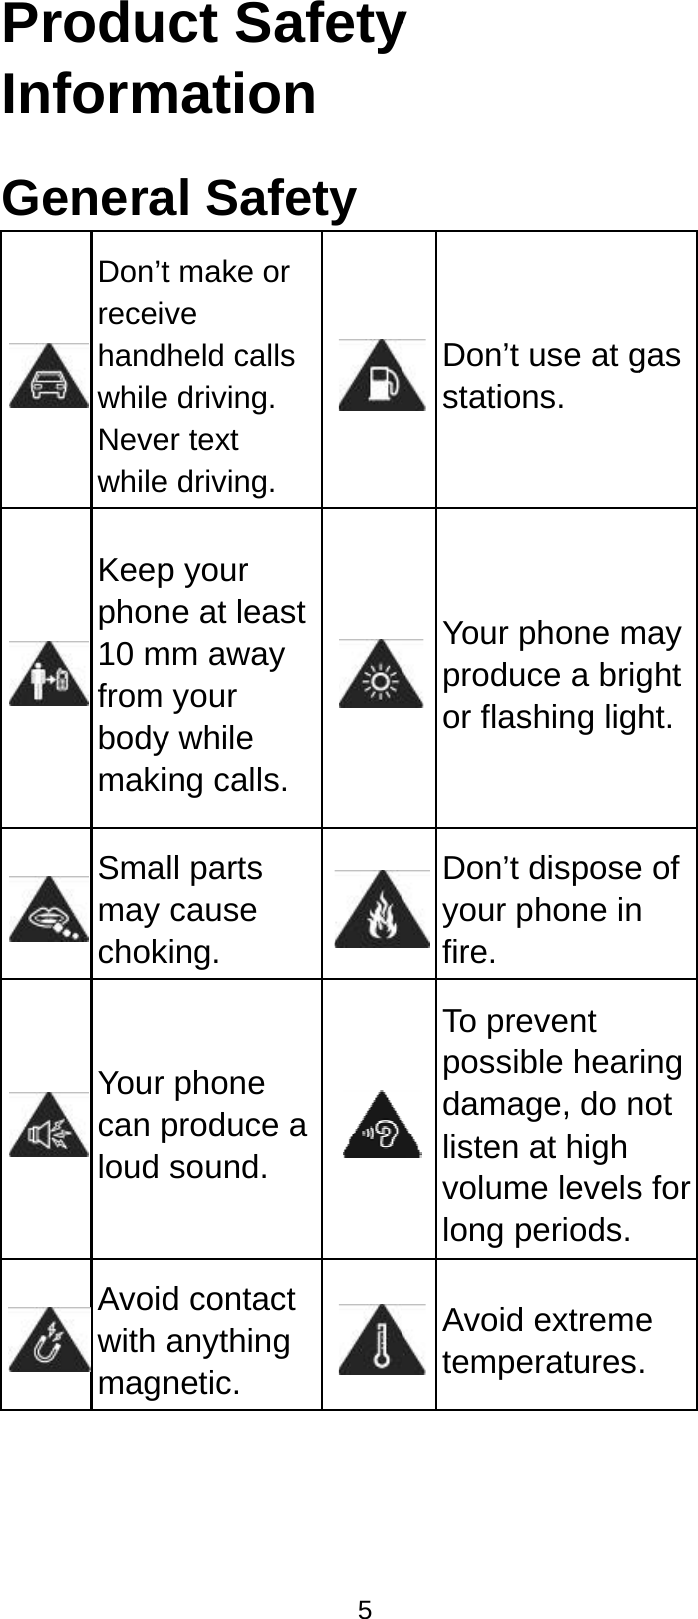  ProduInformGenera Don’treceihandwhileNevewhile Keepphon10 mfrom bodymaki Smamay chok Your can ploud  Avoidwith magn5ct Safetymation al Safety t make or ve held calls e driving. er text e driving. p your ne at least mm away your y while ing calls.ll parts cause king. rphone produce a sound. d contact anything netic. y Don’t use at gstations. Your phone mproduce a brigor flashing lighDon’t disposeyour phone infire. To prevent possible heardamage, do nlisten at high volume levelslong periods. Avoid extremetemperaturesgas may ght ht. e of n ring not s for e . 